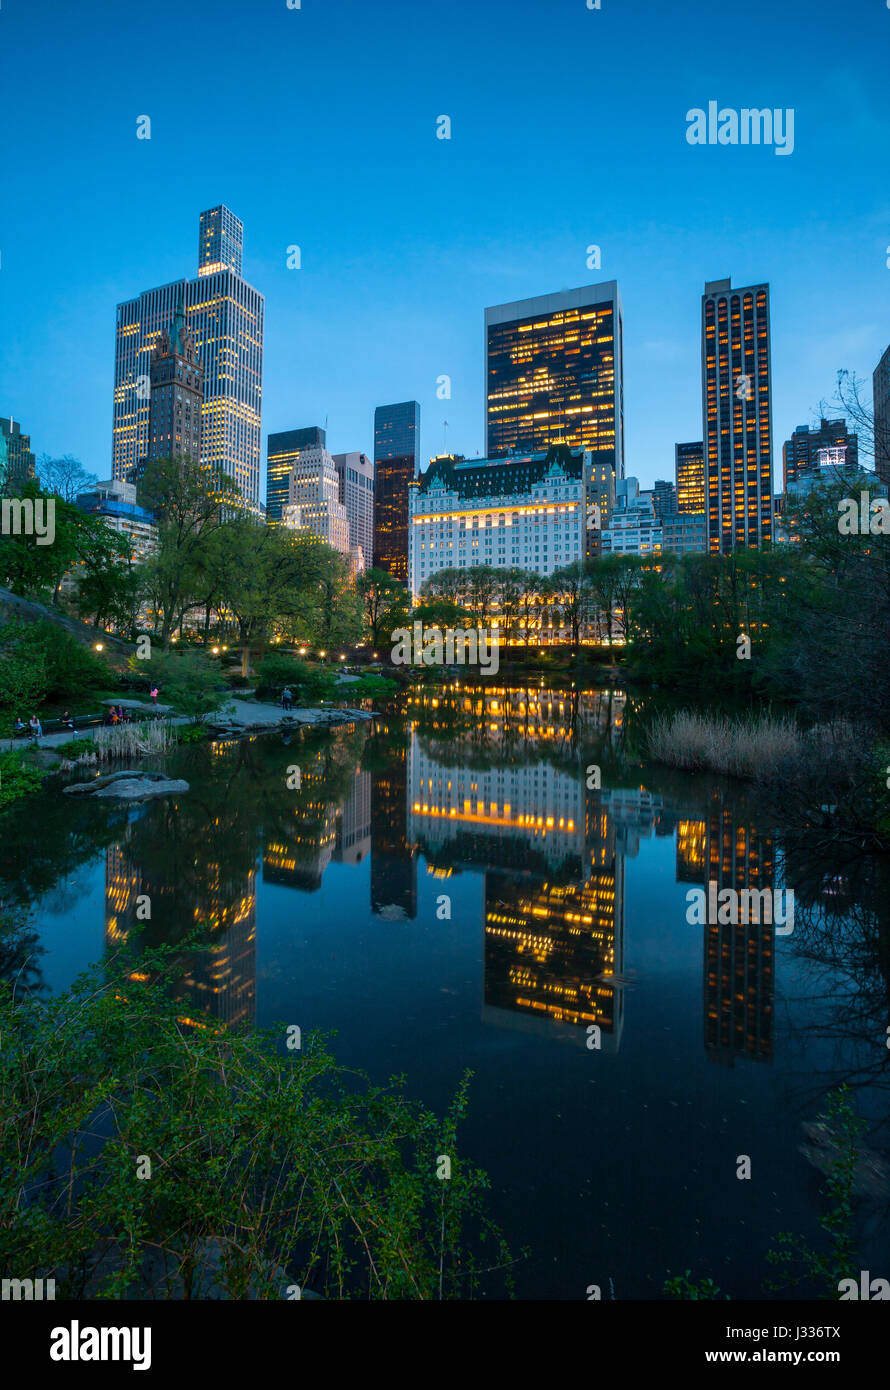 View to Manhattan from Central park at night, New York Stock Photo